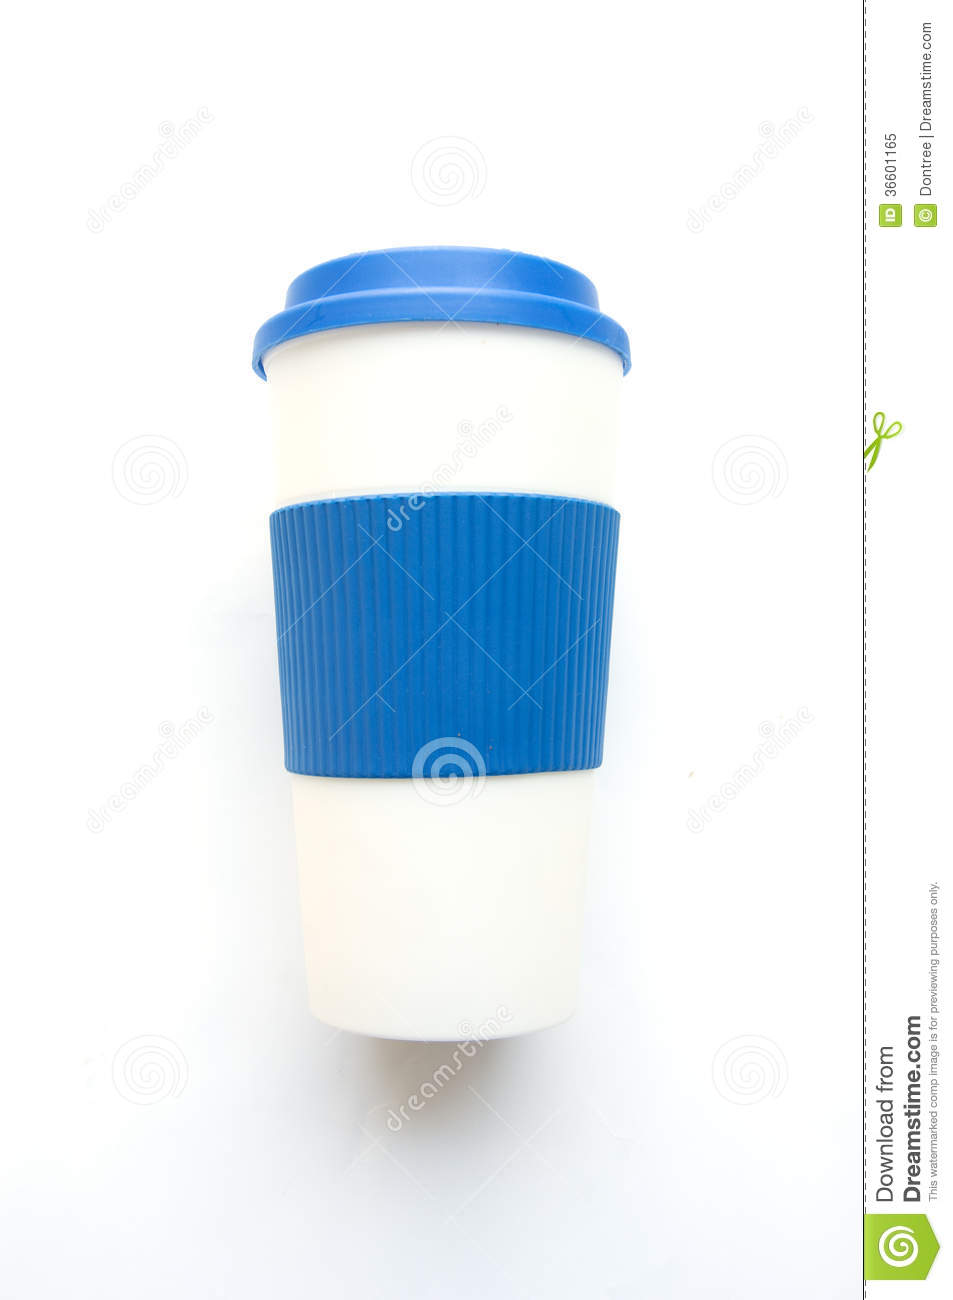 Travel Tumbler Cup Royalty Free Stock Photo   Image  36601165